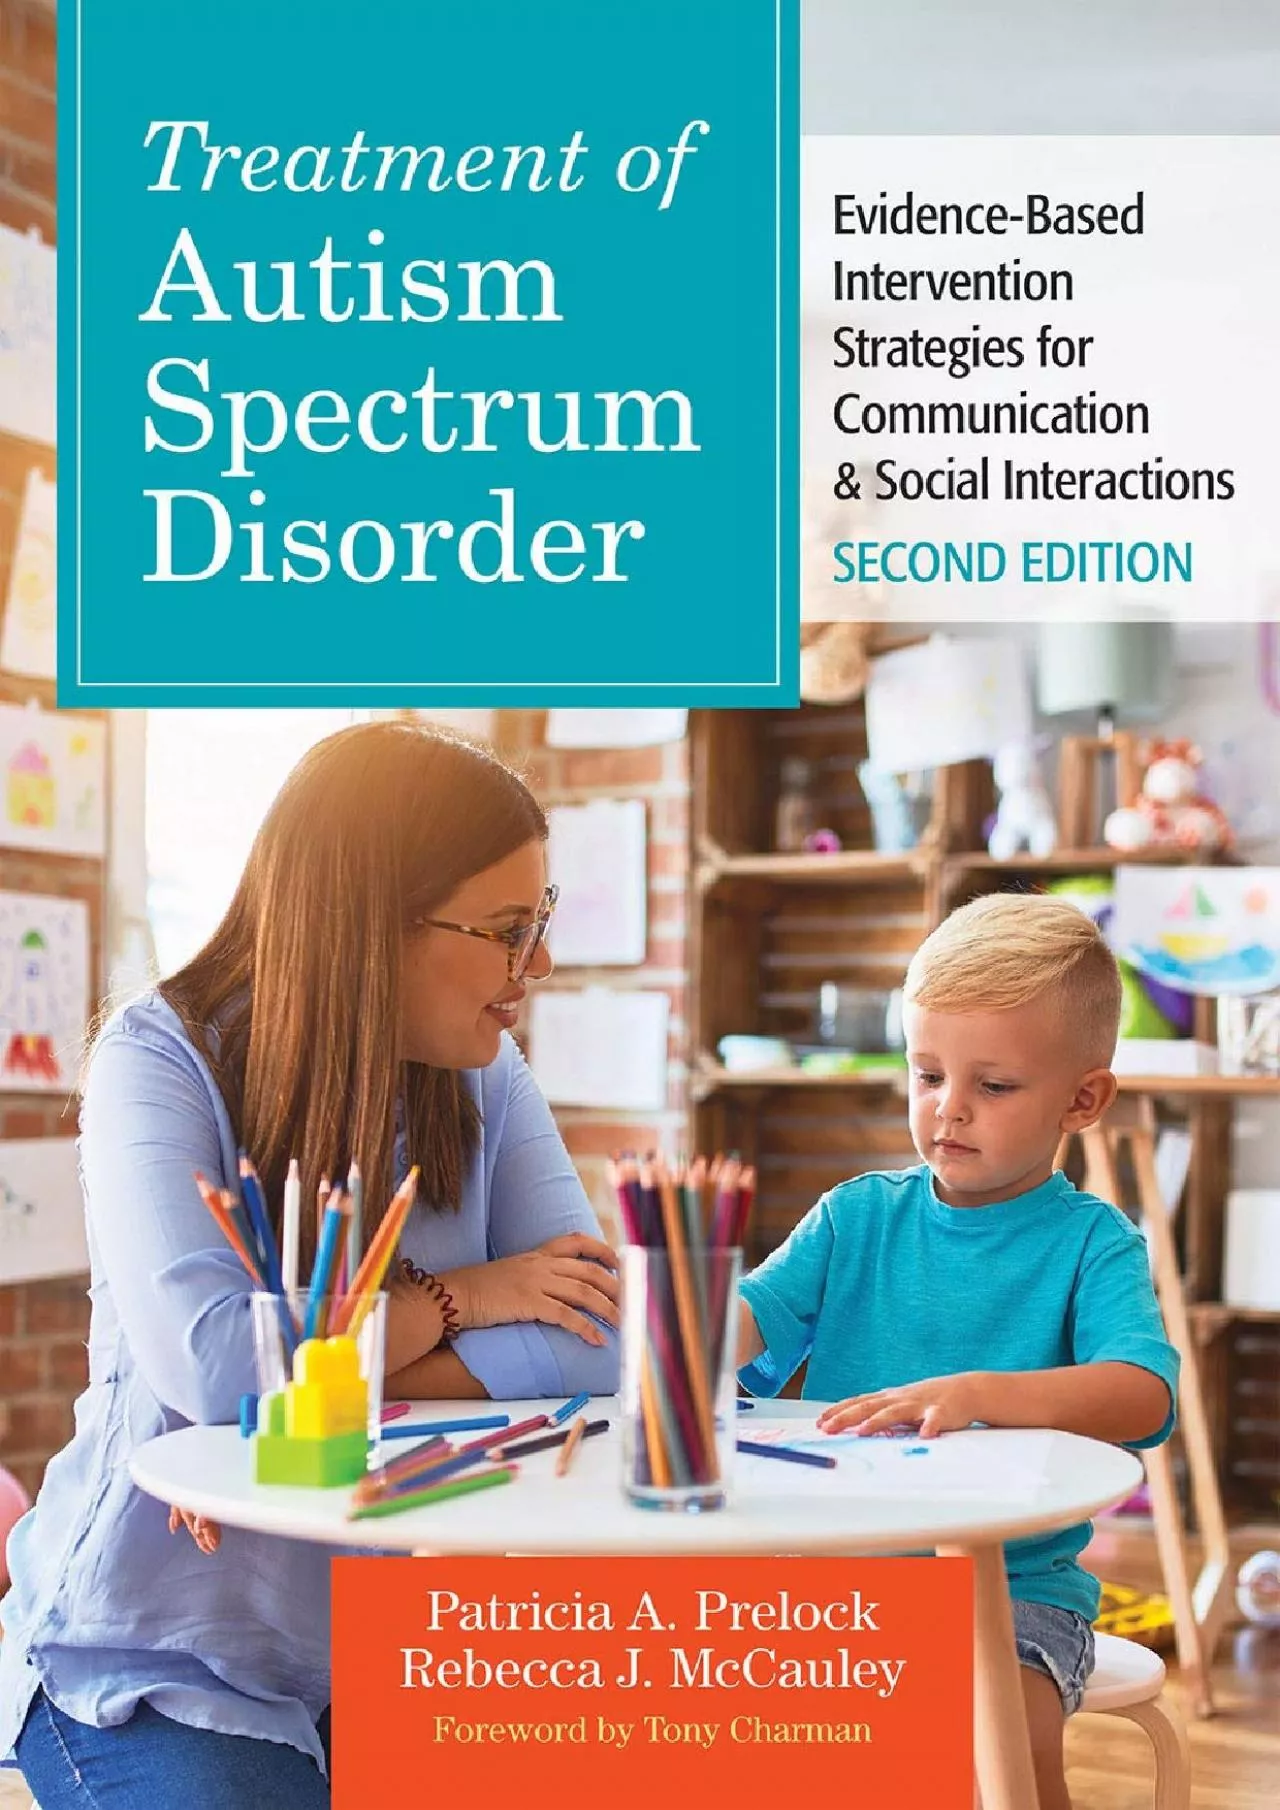 (BOOK)-Treatment of Autism Spectrum Disorder: Evidence-Based Intervention Strategies for